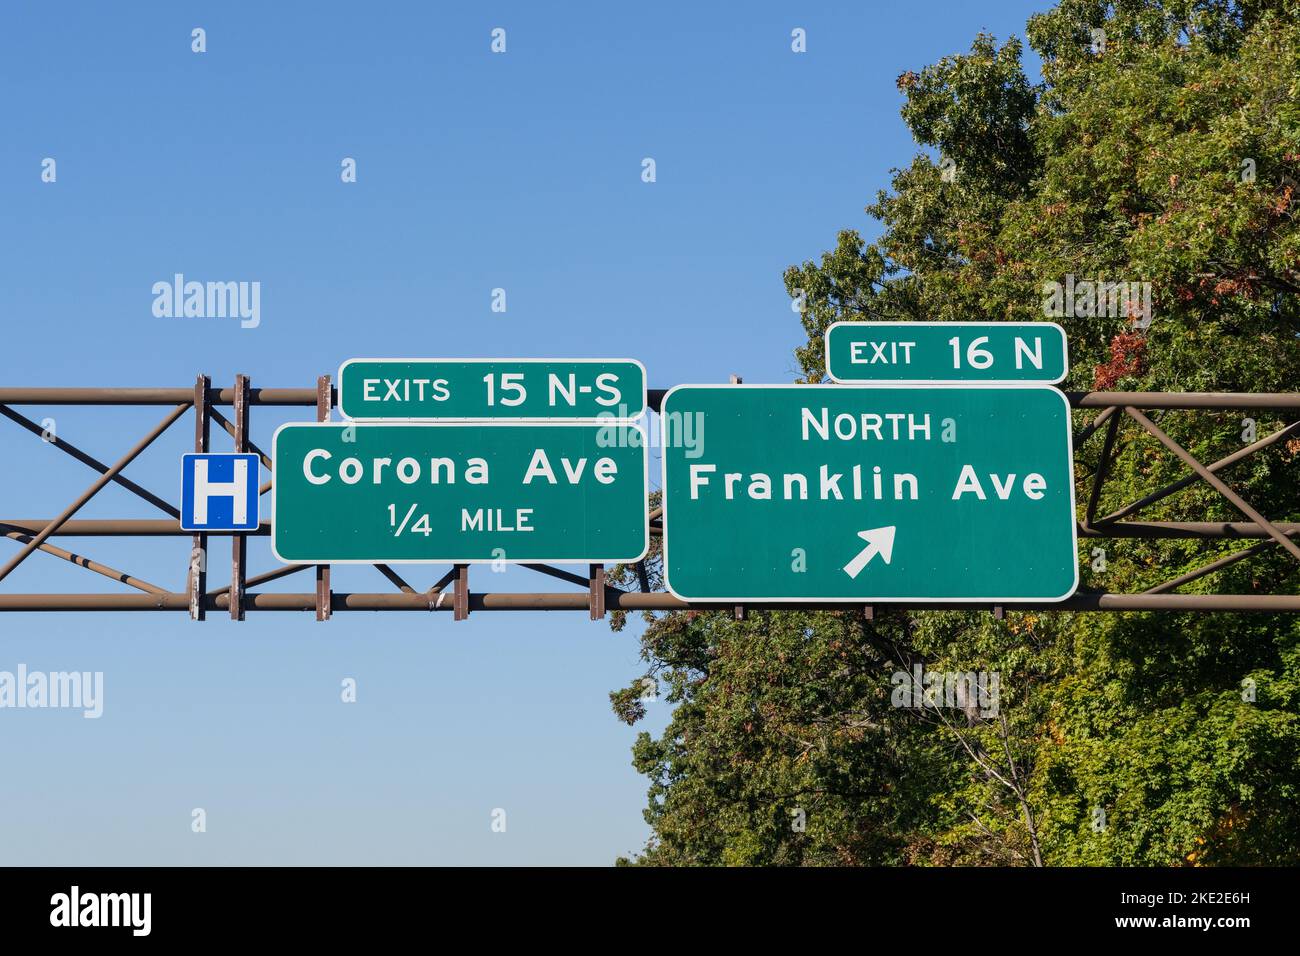 exit sign on the Southern State Parkway on Long Island, New York for 15 N-S Corona Ave and 16N North Franklin Ave with blue H sign indicating a hospit Stock Photo